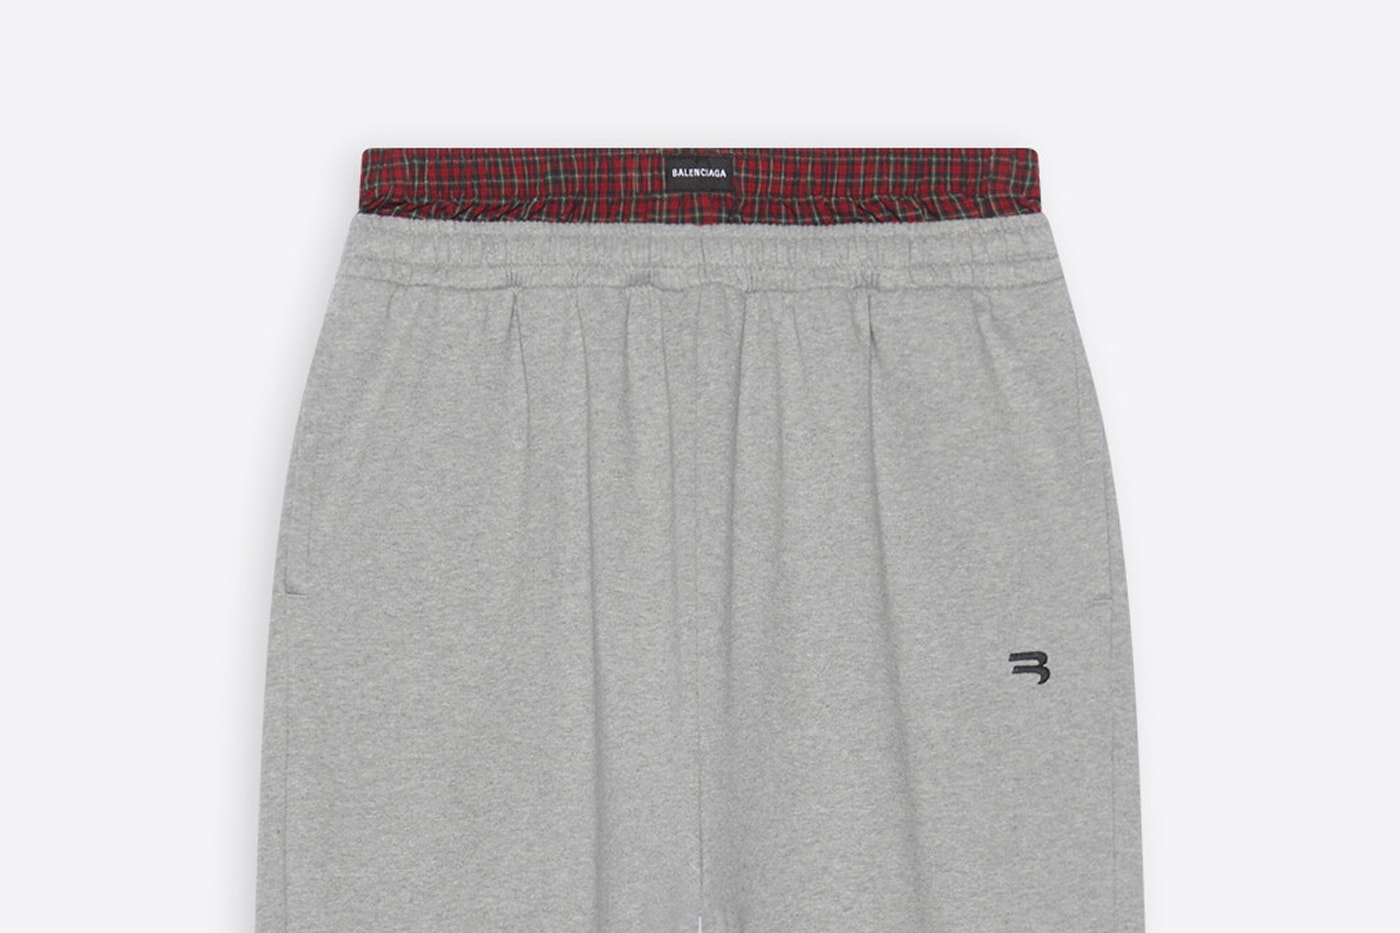 https://image-cdn.hypb.st/https%3A%2F%2Fhypebeast.com%2Fimage%2F2021%2F09%2Fpeople-arent-happy-about-balenciagas-sweatpants-with-exposed-boxer-detail-003.jpg?cbr=1&q=90